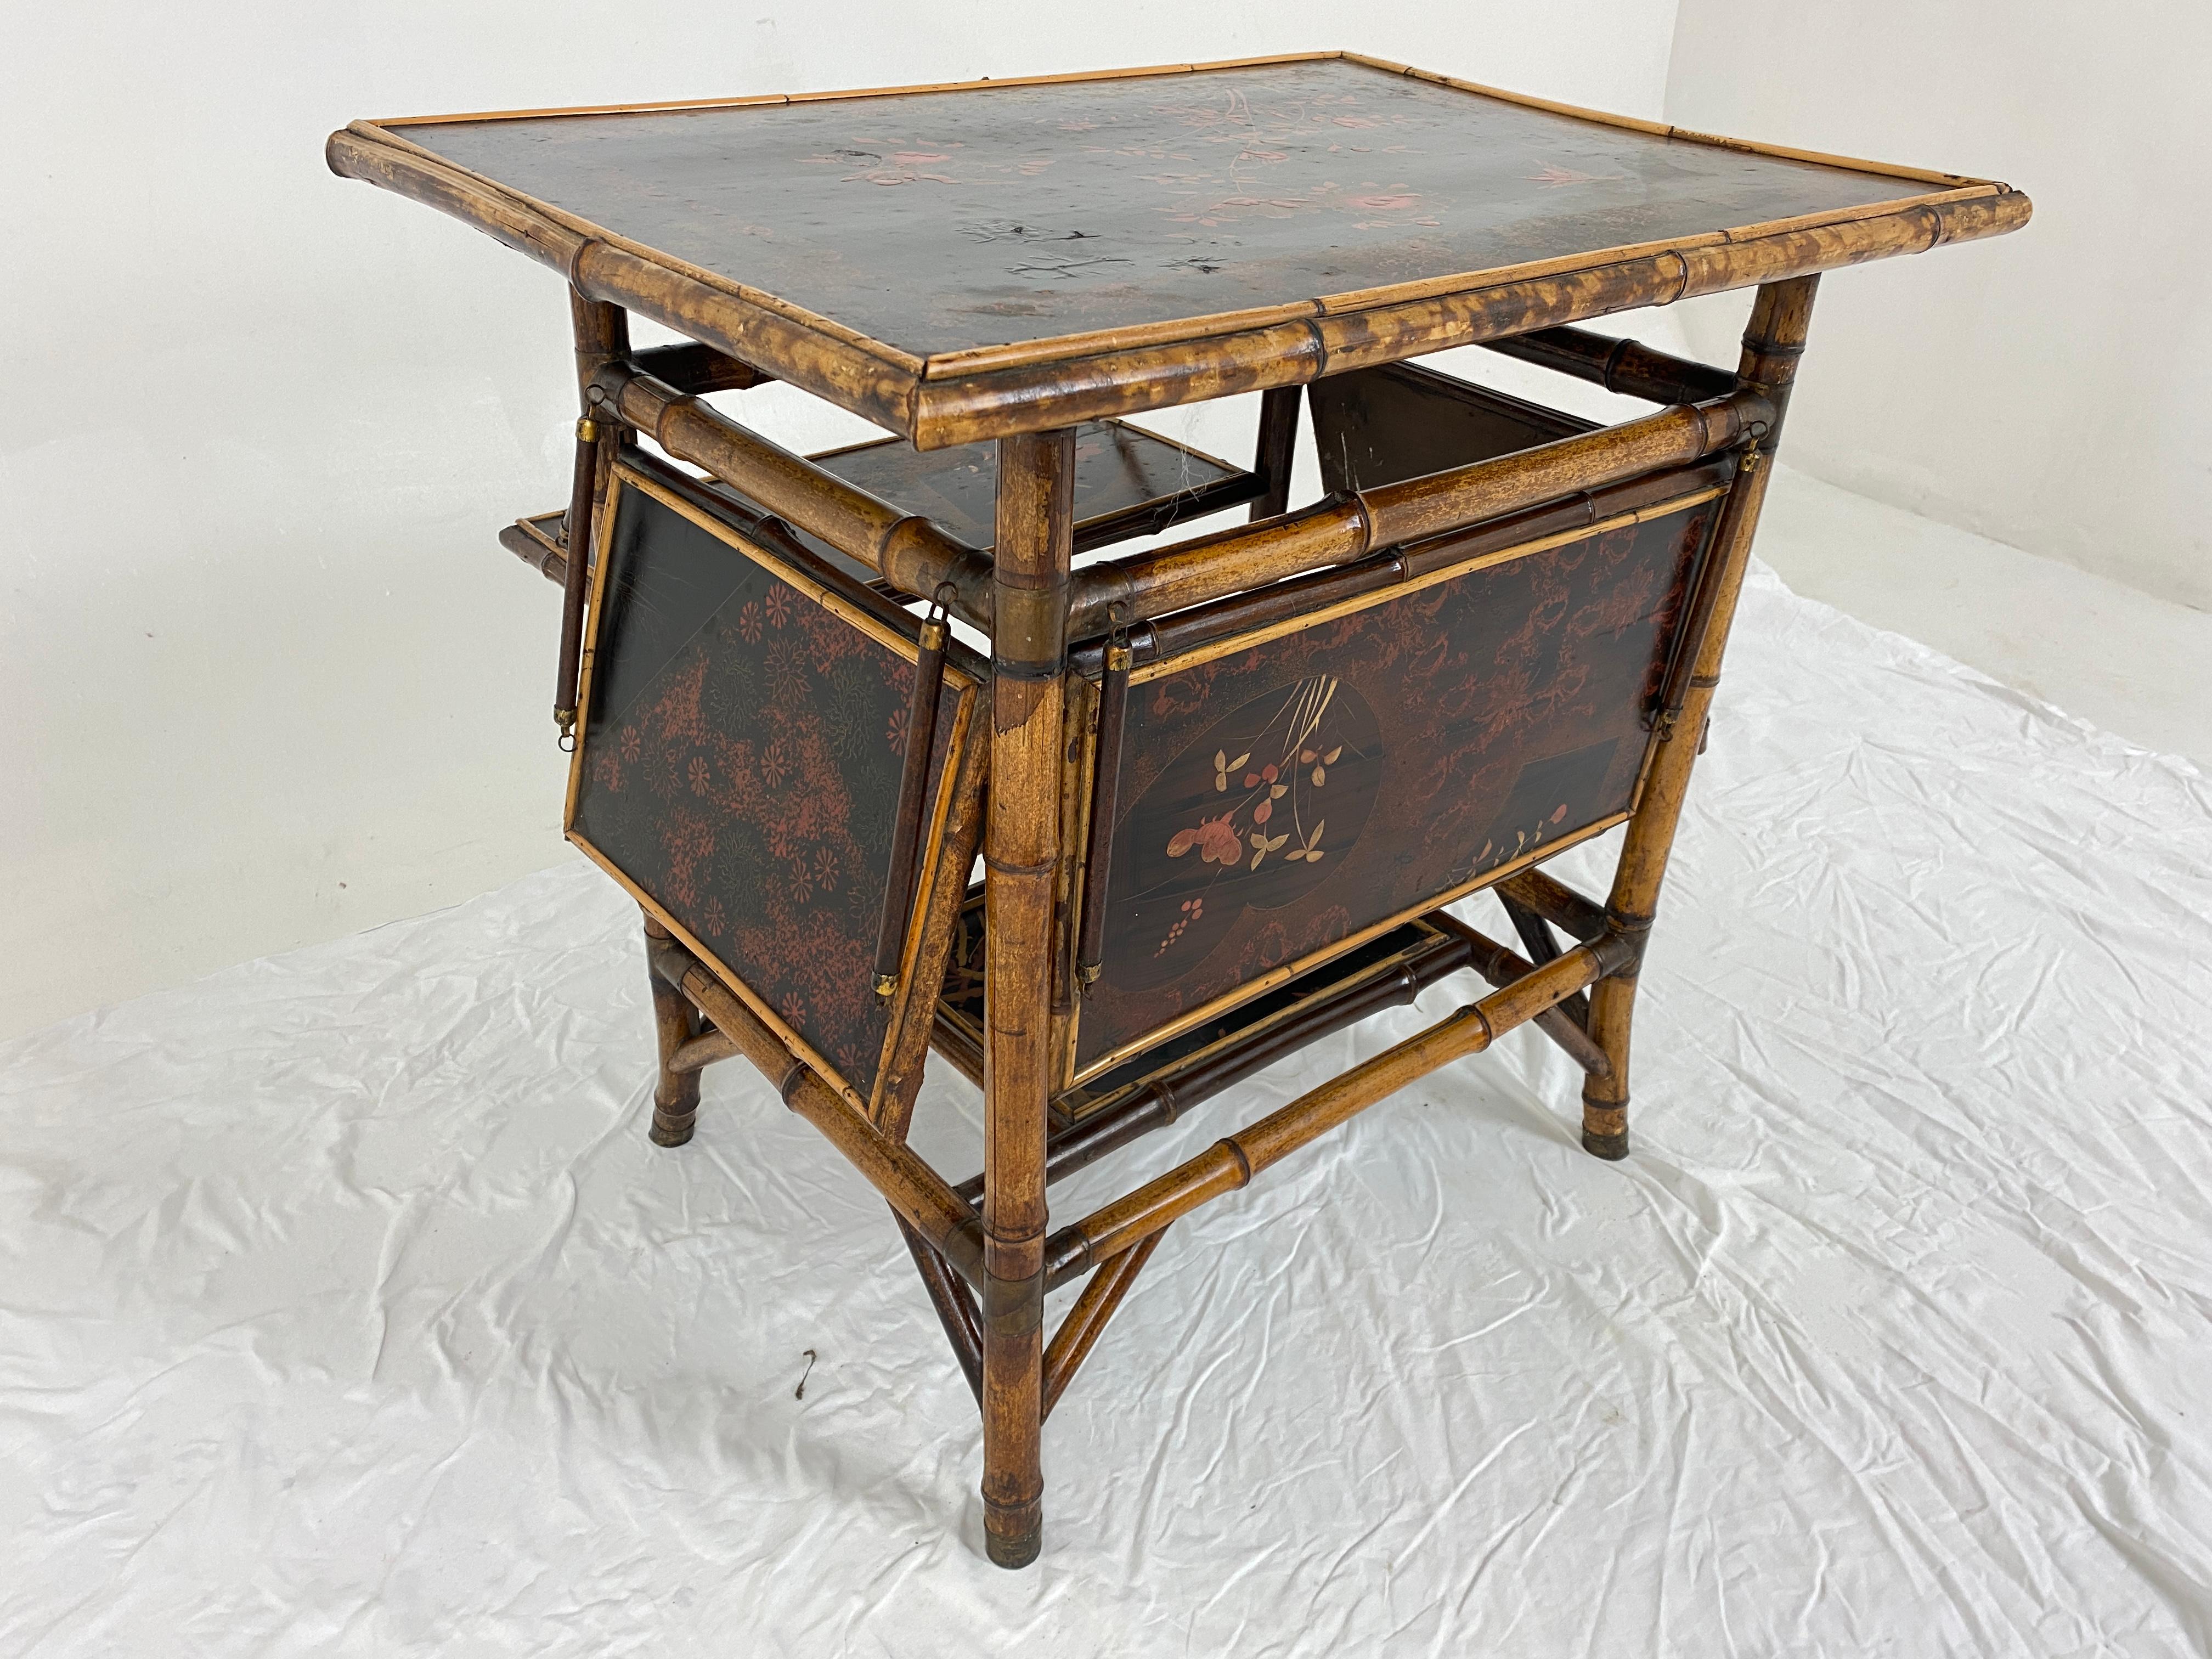 Scottish Antique Victorian Japanned Tiered Bamboo Table Chinoiserie, Scotland 1880, H735